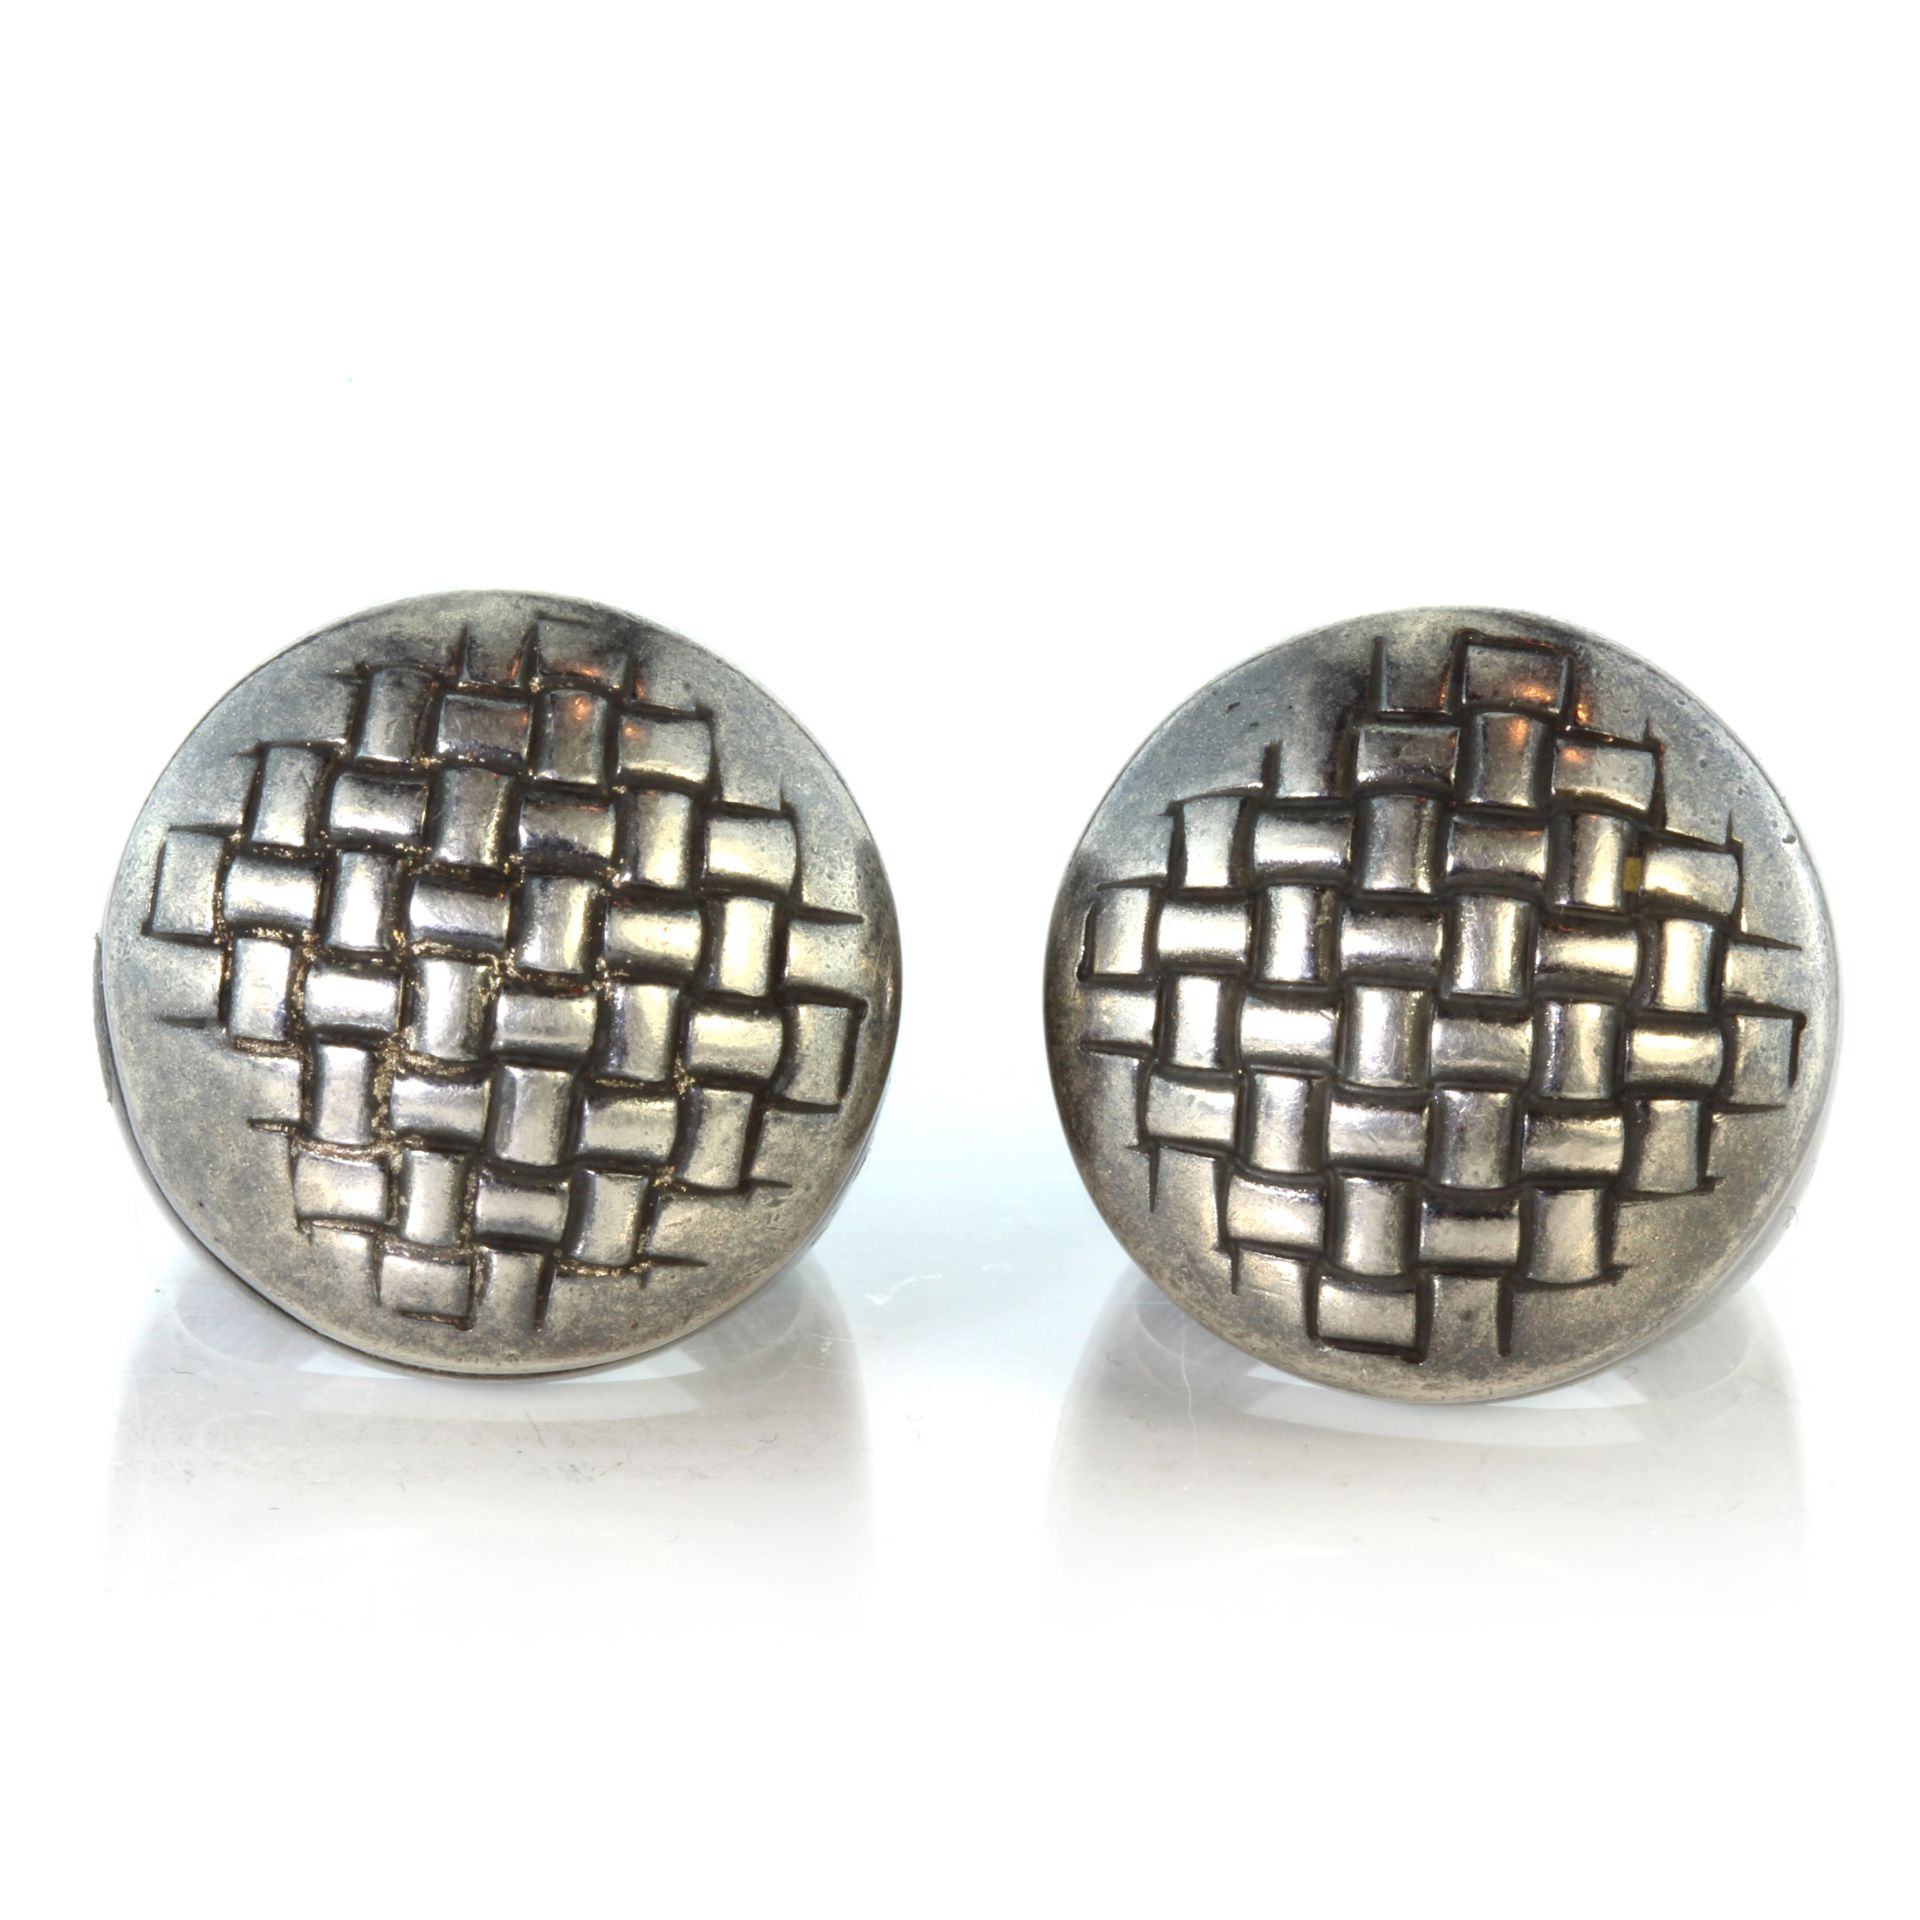 A pair of vintage Italian sterling silver cocktail rings each designed as a large bombe body with